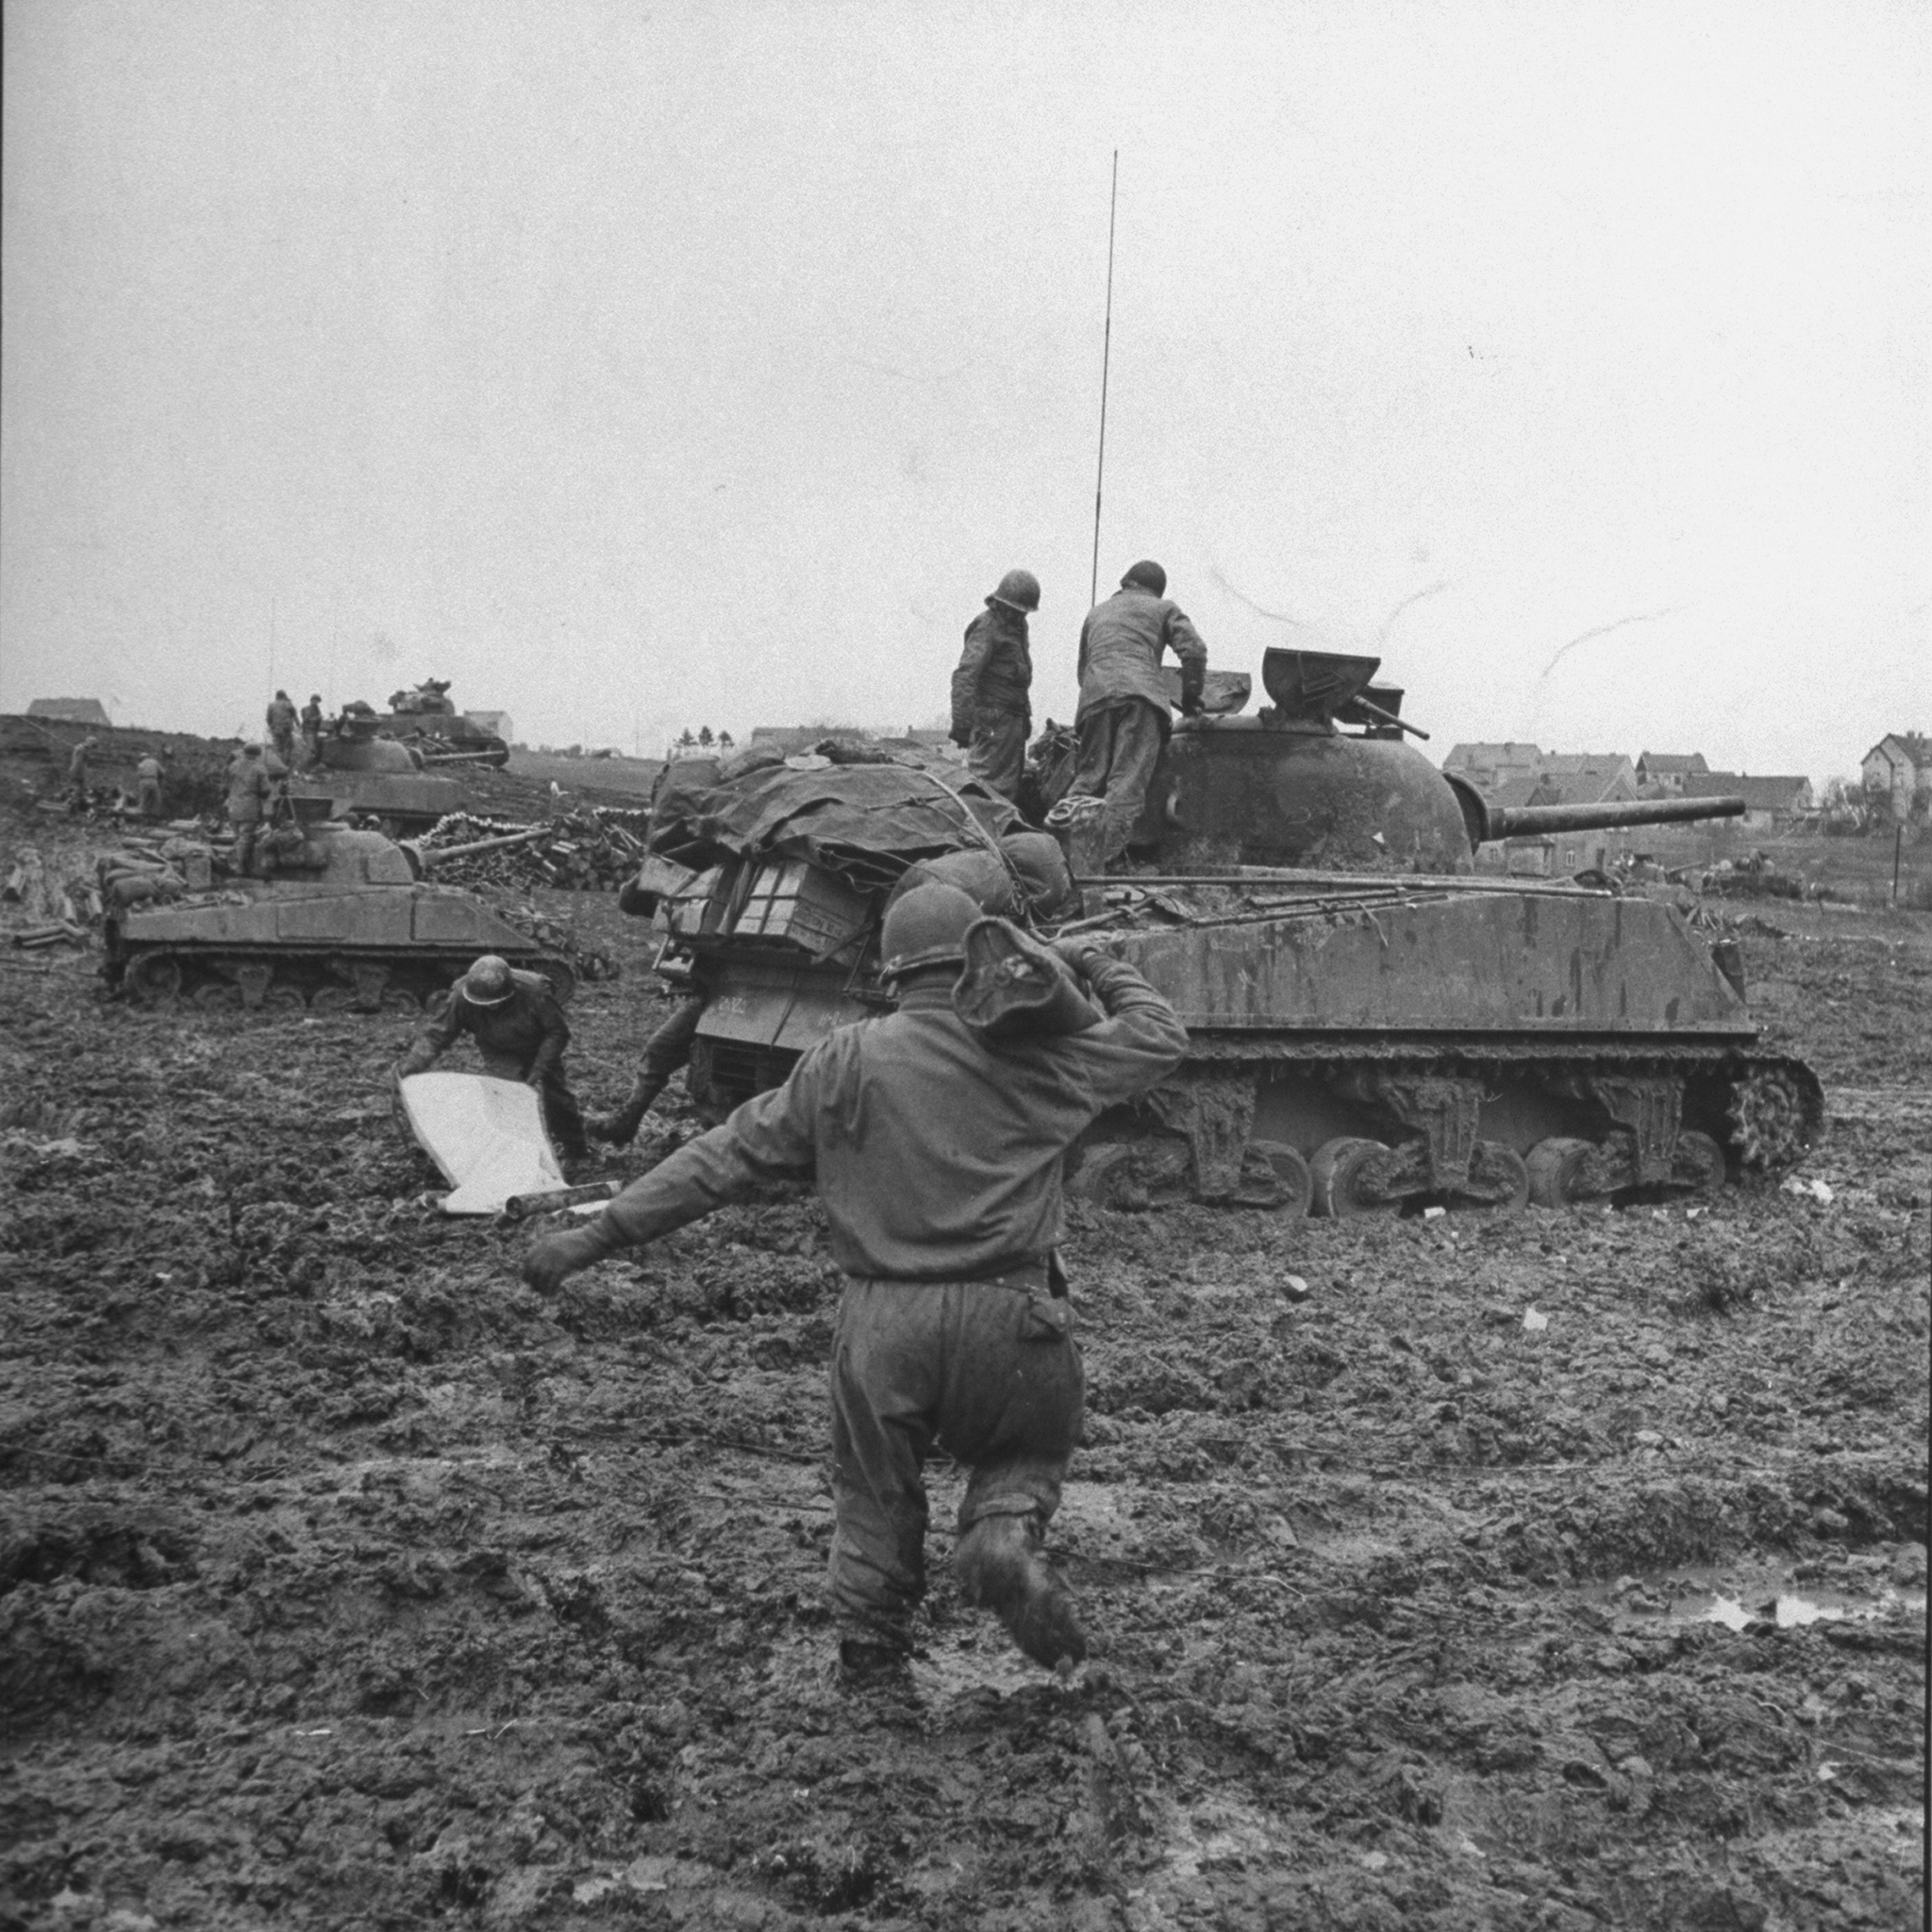 An American soldier slogs through deep mud carrying ammunition to a waiting Sherman tank of 3rd Armored Division during the battle for control of the Stolberg area, Germany, 1944.